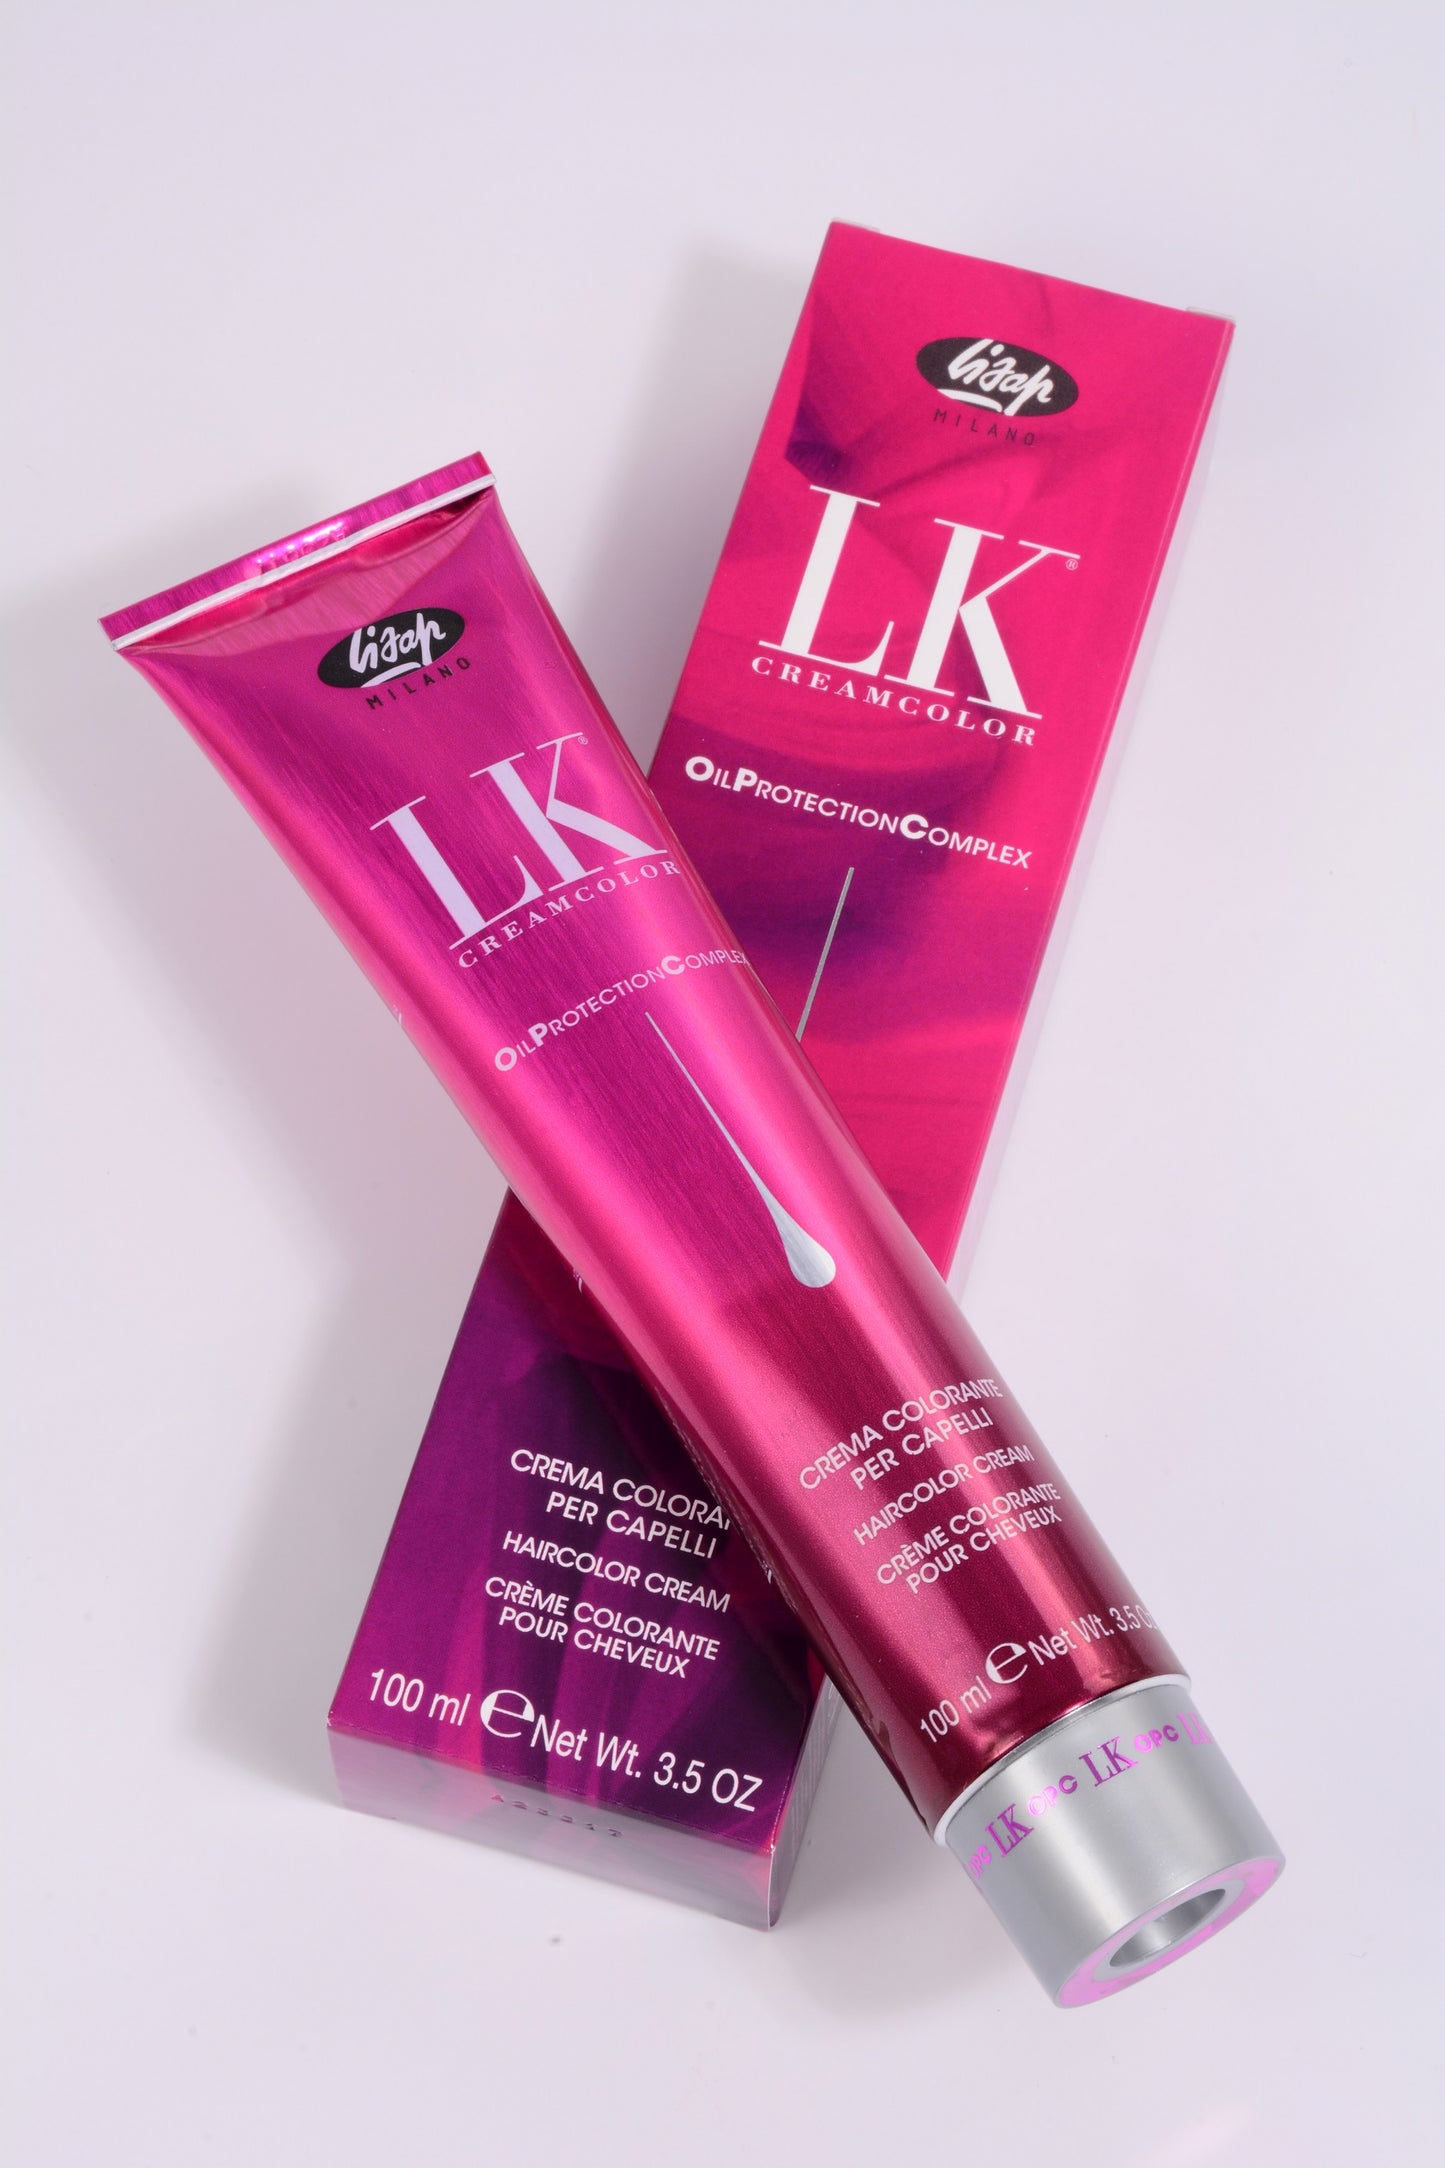 LK Creamcolor 5/4 Oil Protection Complex